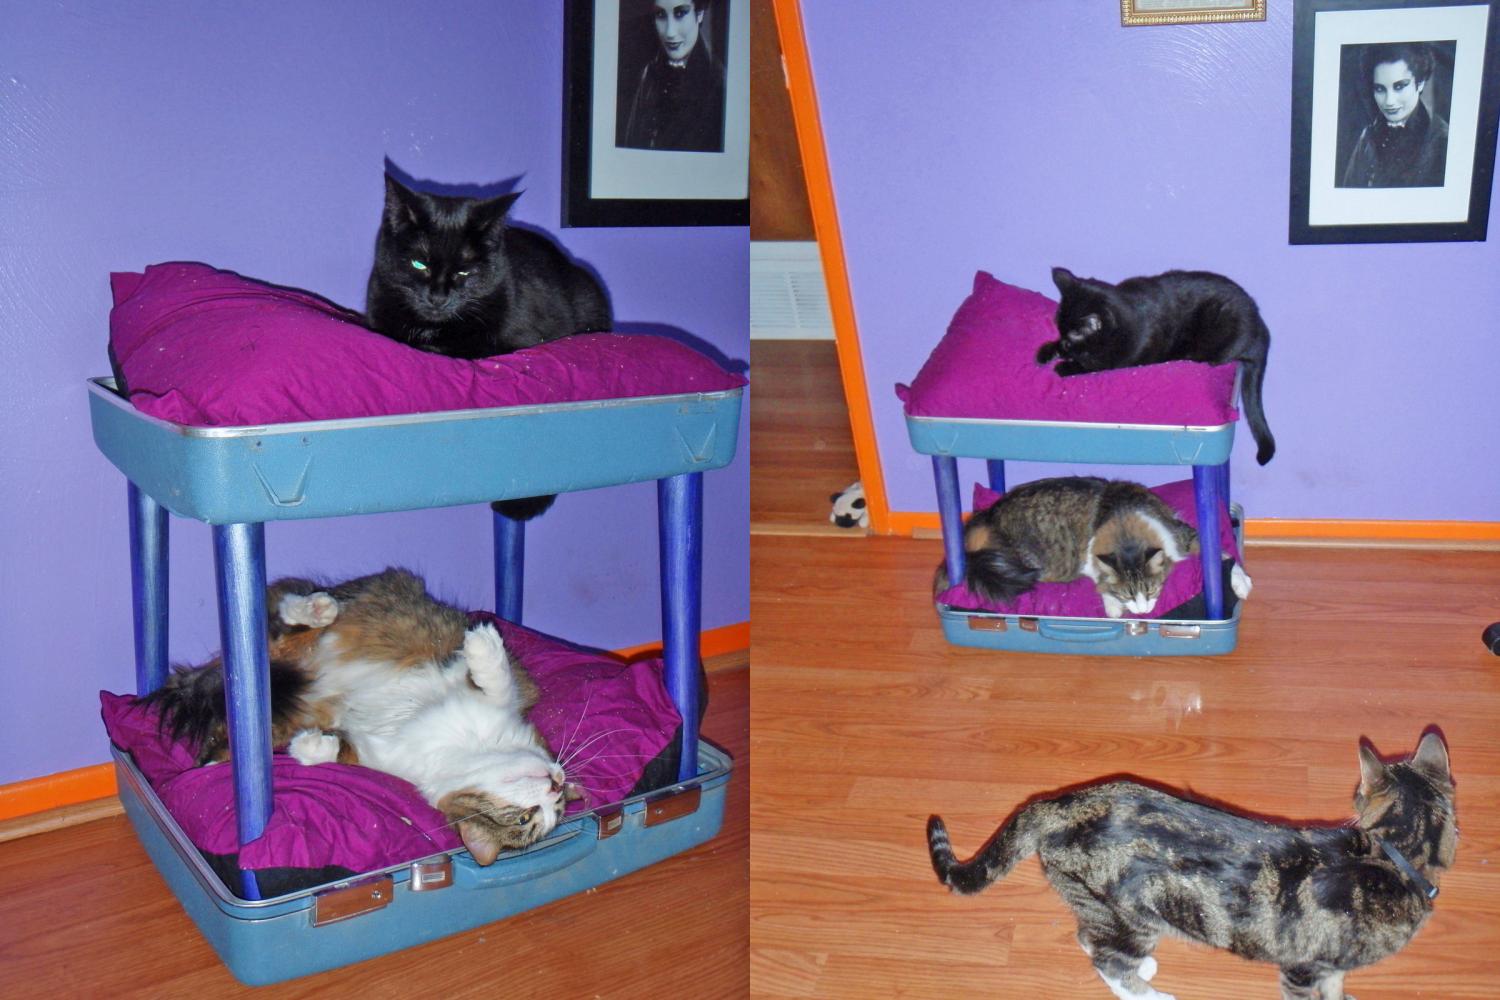 This Suitcase Cat Bunk Bed Is A, Cat Bunk Beds Diy